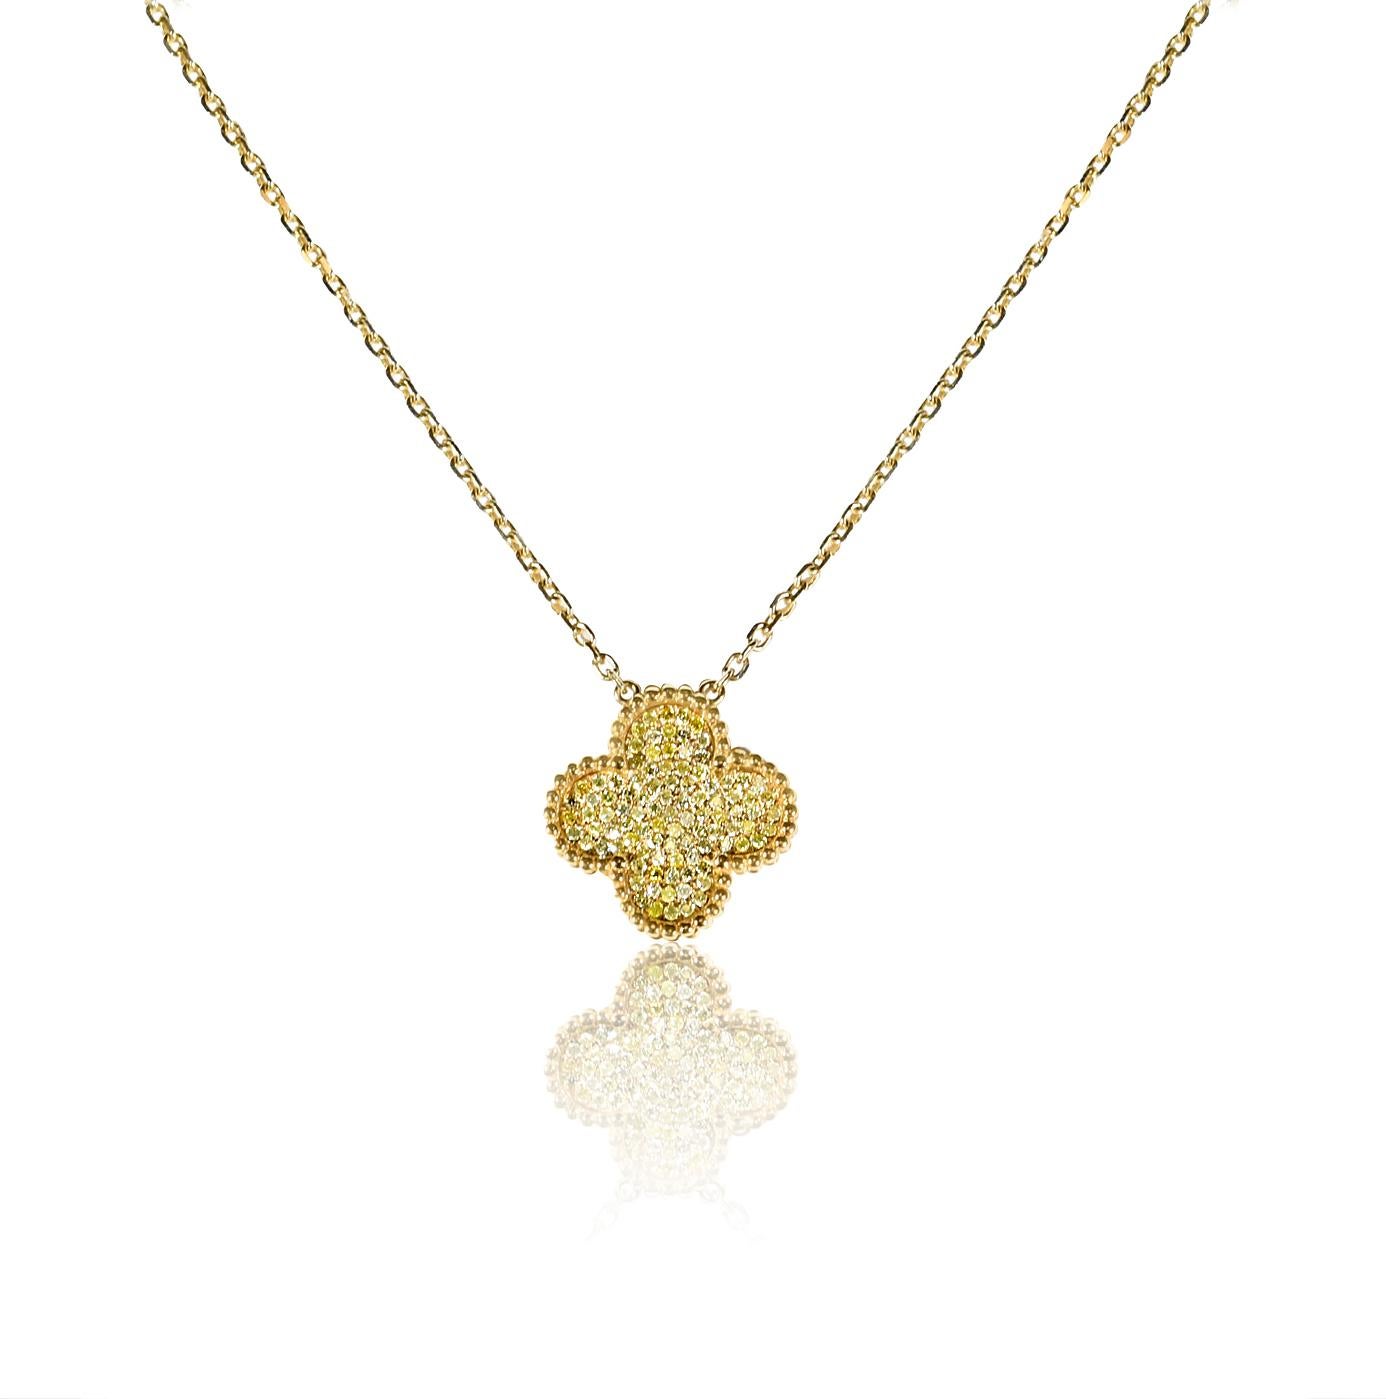 The Following Item we are offering is A Rare 18KT Gold Fancy Large Fancy Yellow Diamond Clover Necklace. Necklace is comprised of Finely Set Glittering Gorgeous Fancy Yellow Diamonds forming a Clover!!! The Diamonds are of Exquisite and Fine